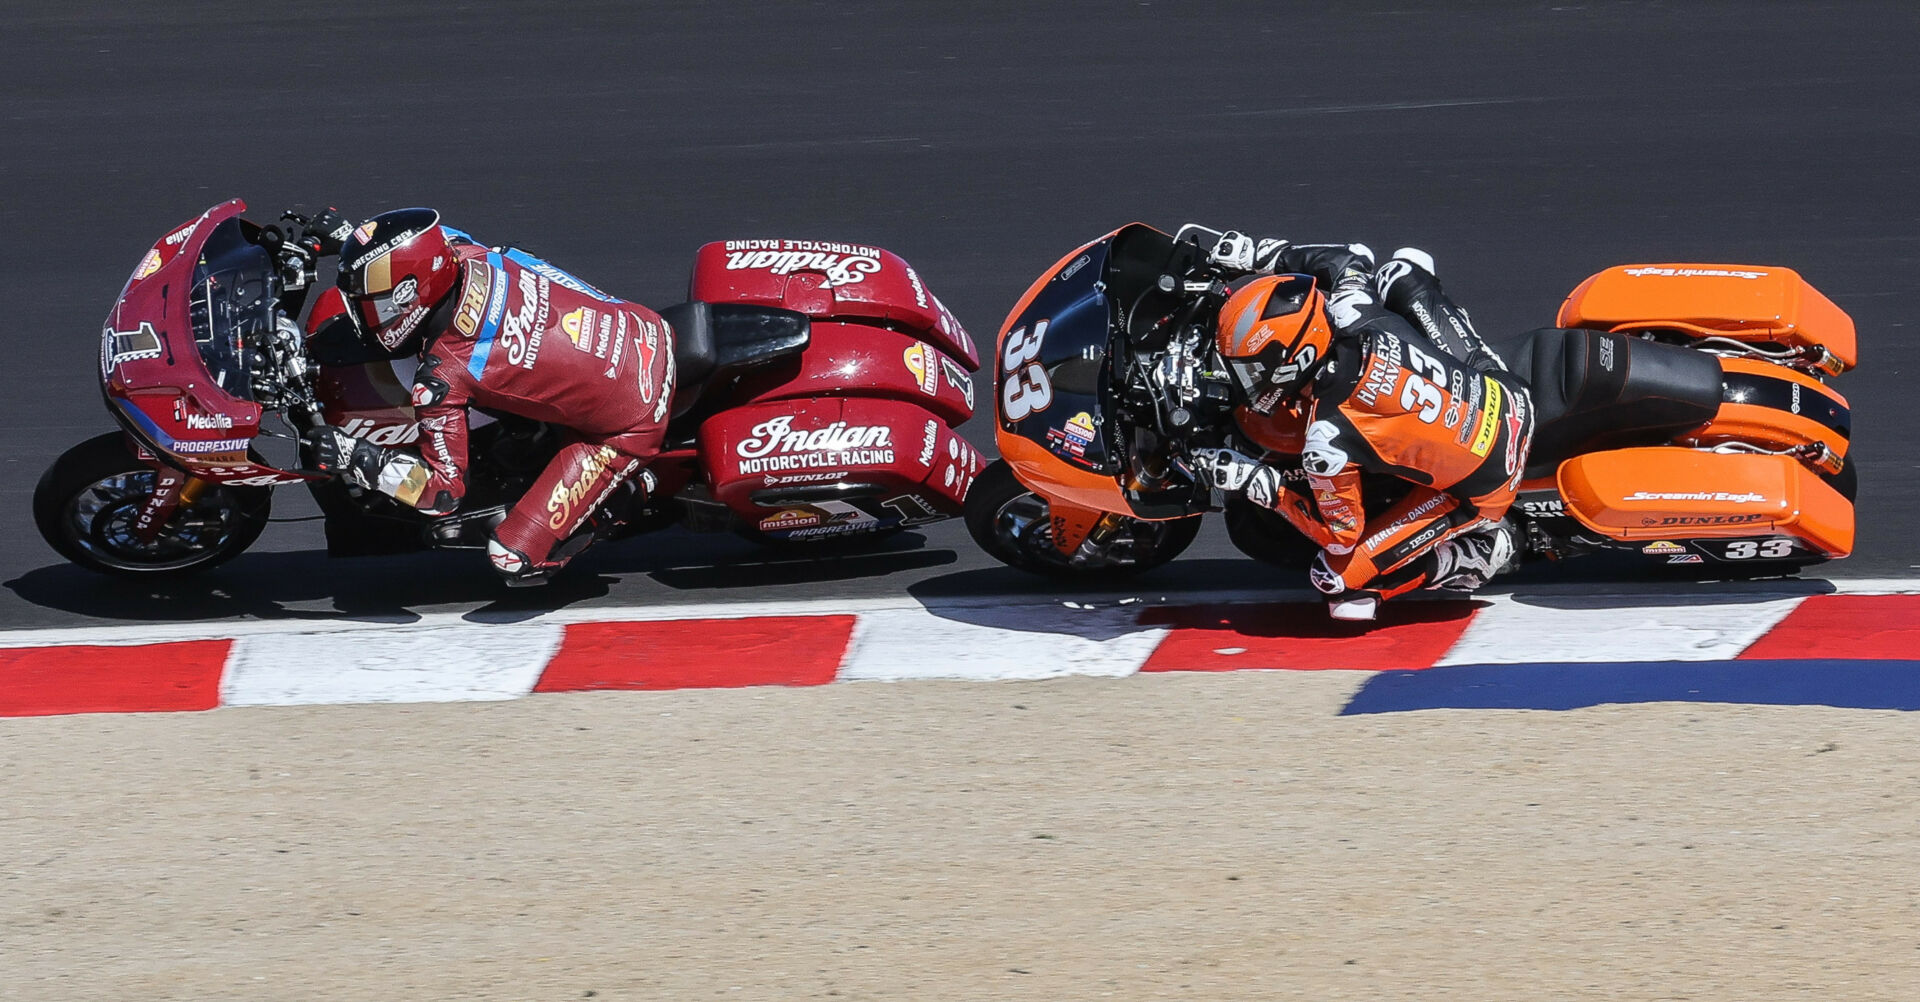 Defending MotoAmerica King Of The Baggers Champion Tyler O'Hara (1) and 2021 Champion Kyle Wyman (33) in action. Photo by Brian J. Nelson.